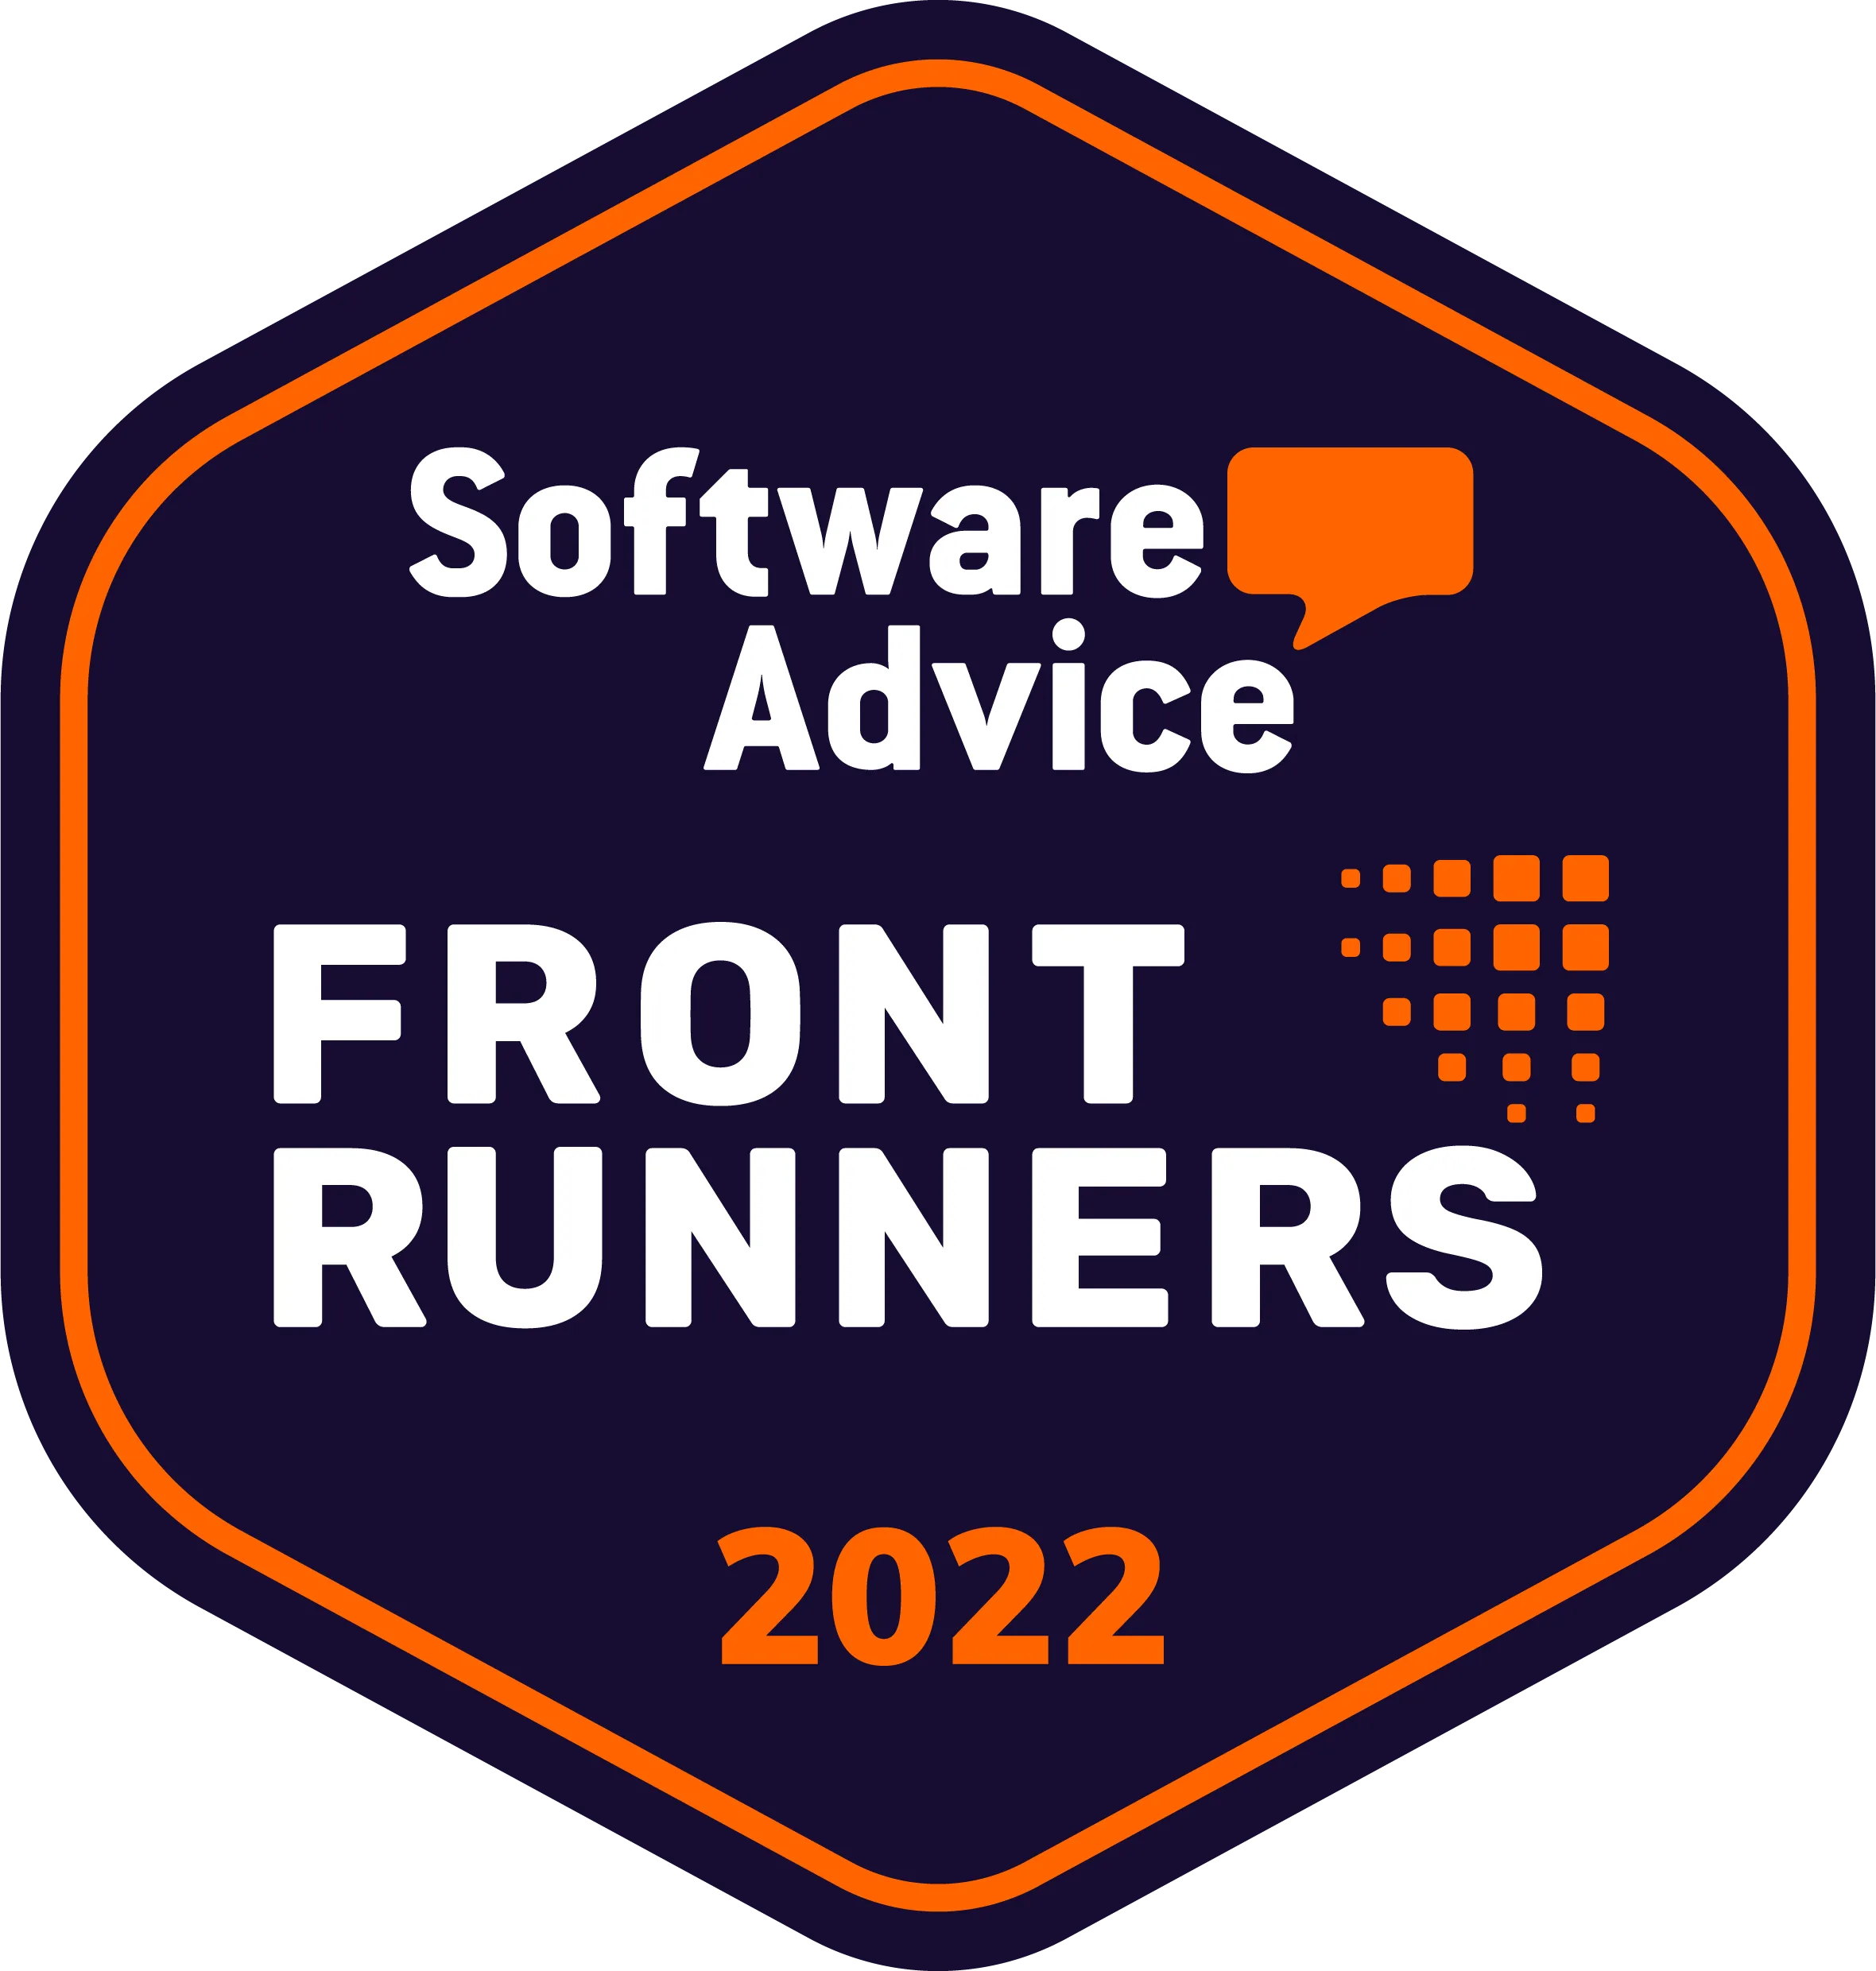 Software Advice: Front Runners 2022